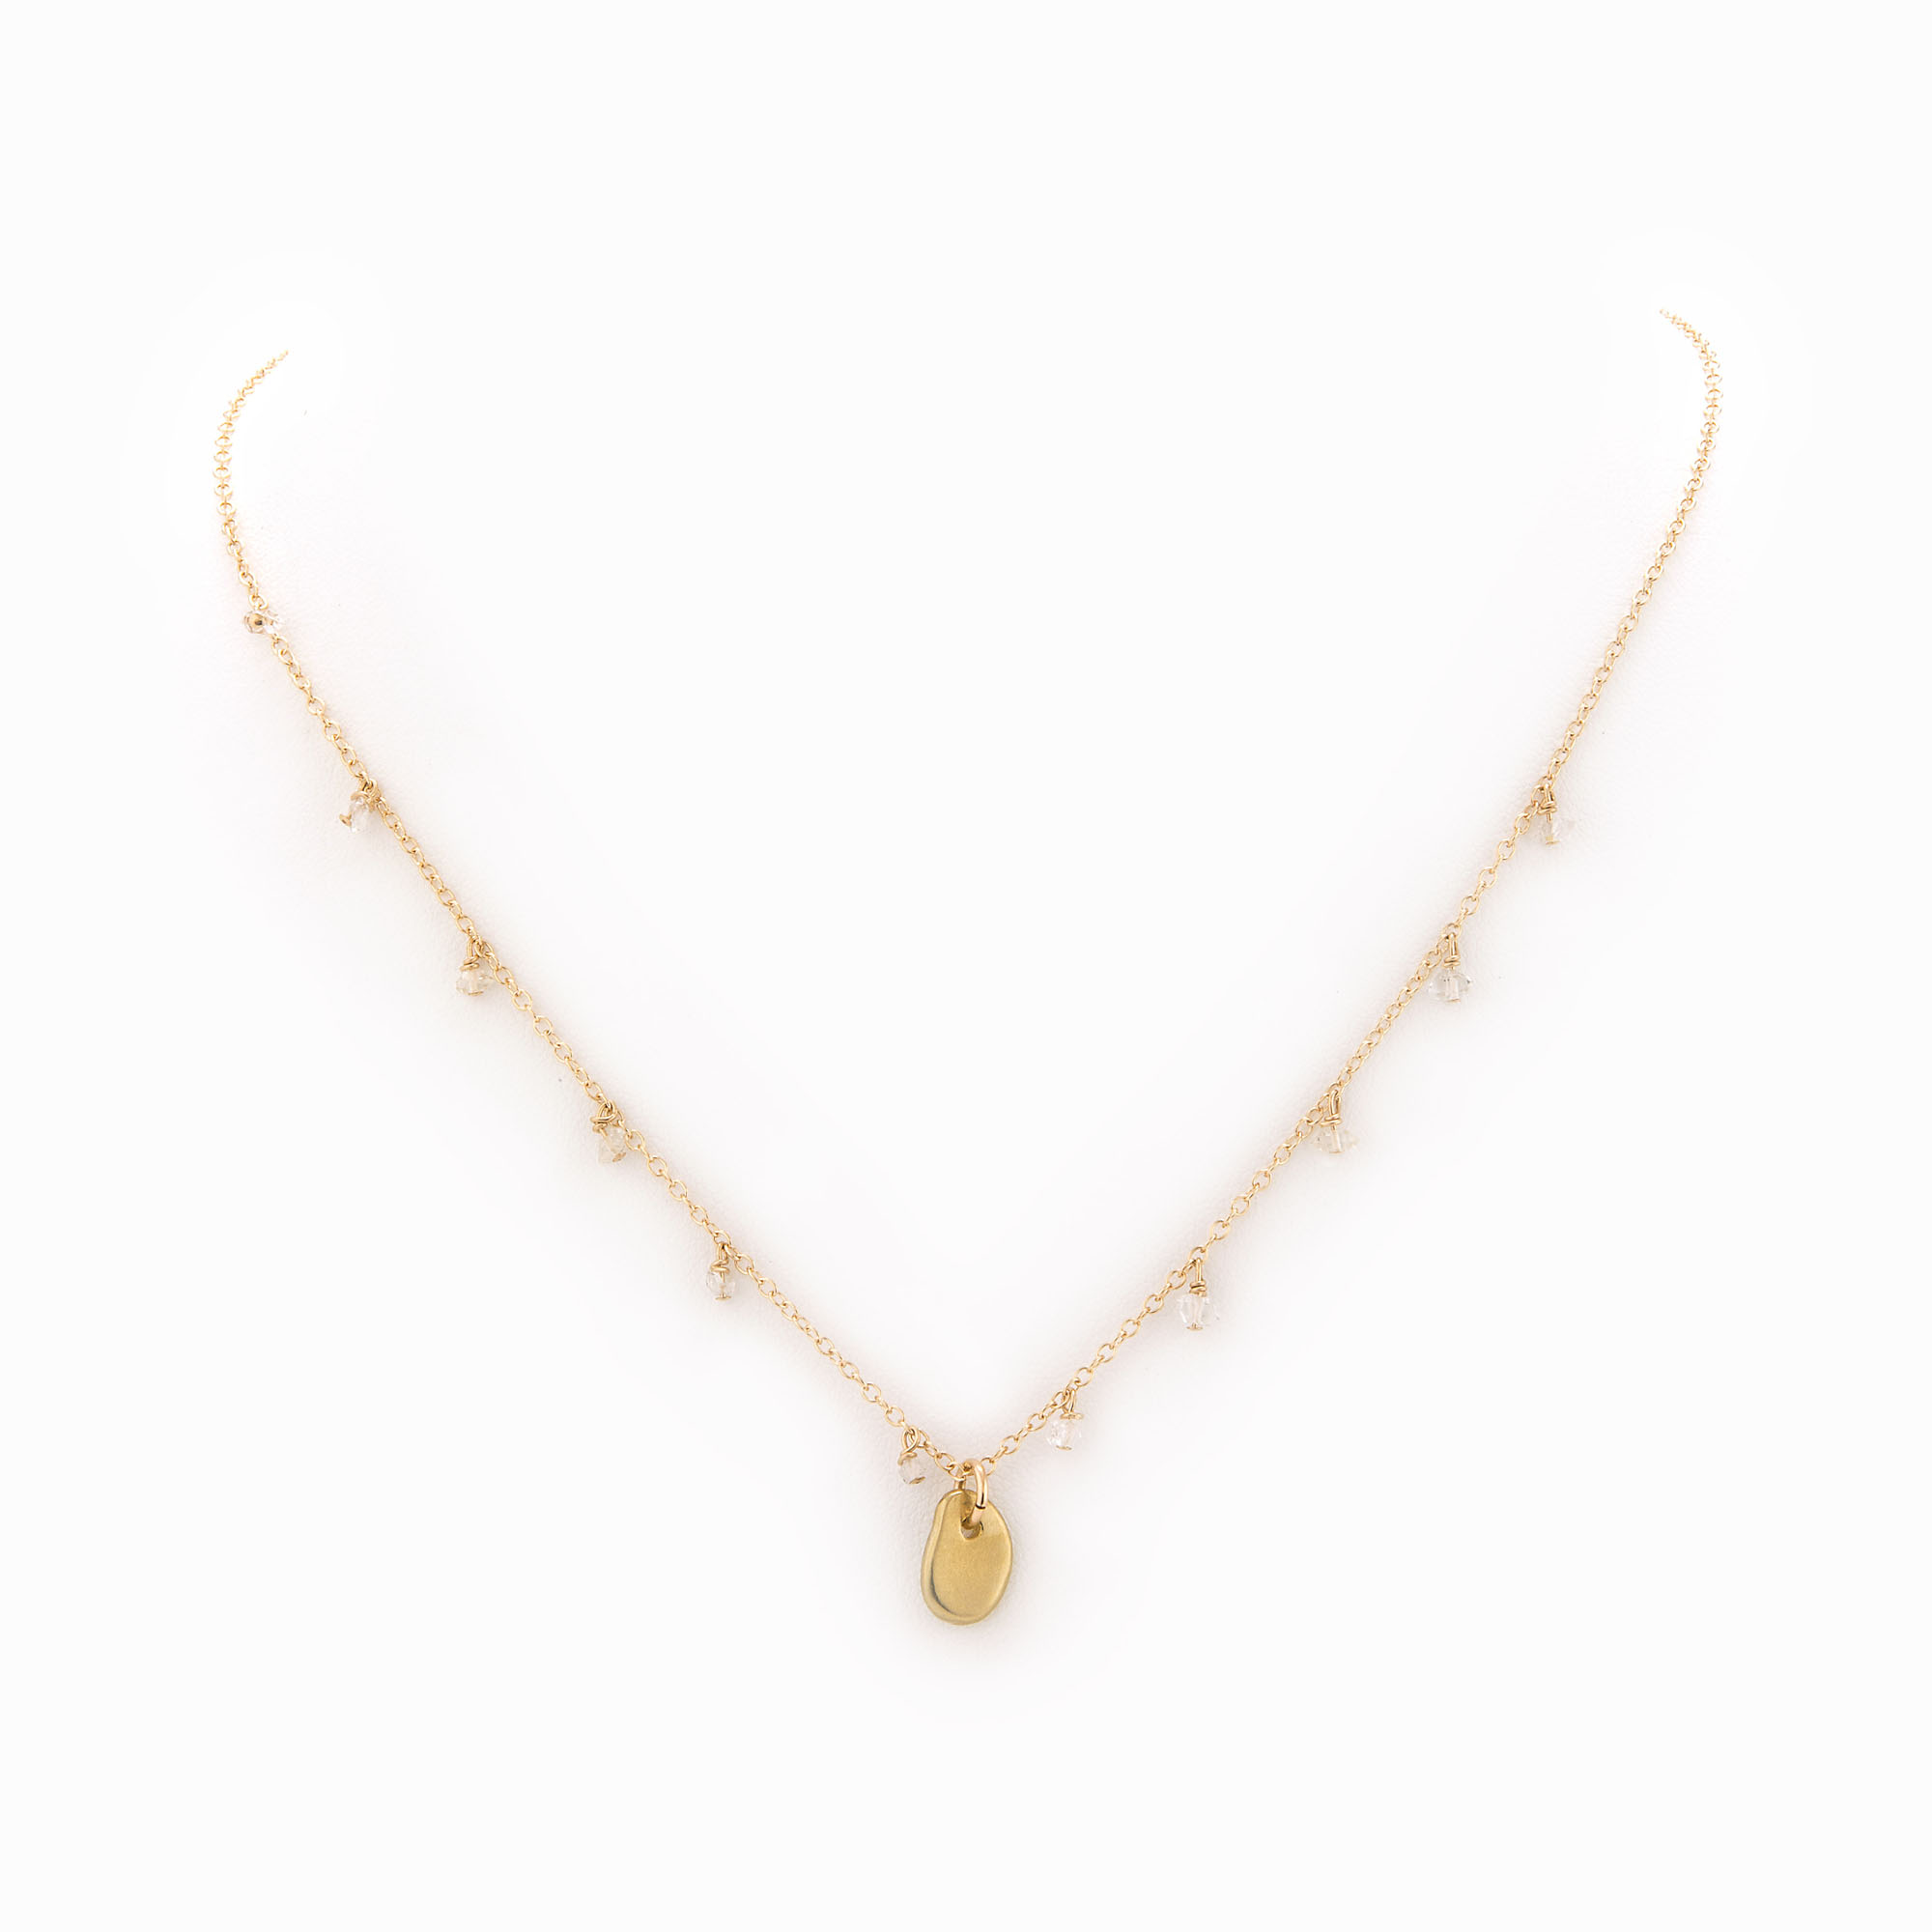 A 14k gold-filled chain necklace with a brass pebble and Herkimer quartz pieces.